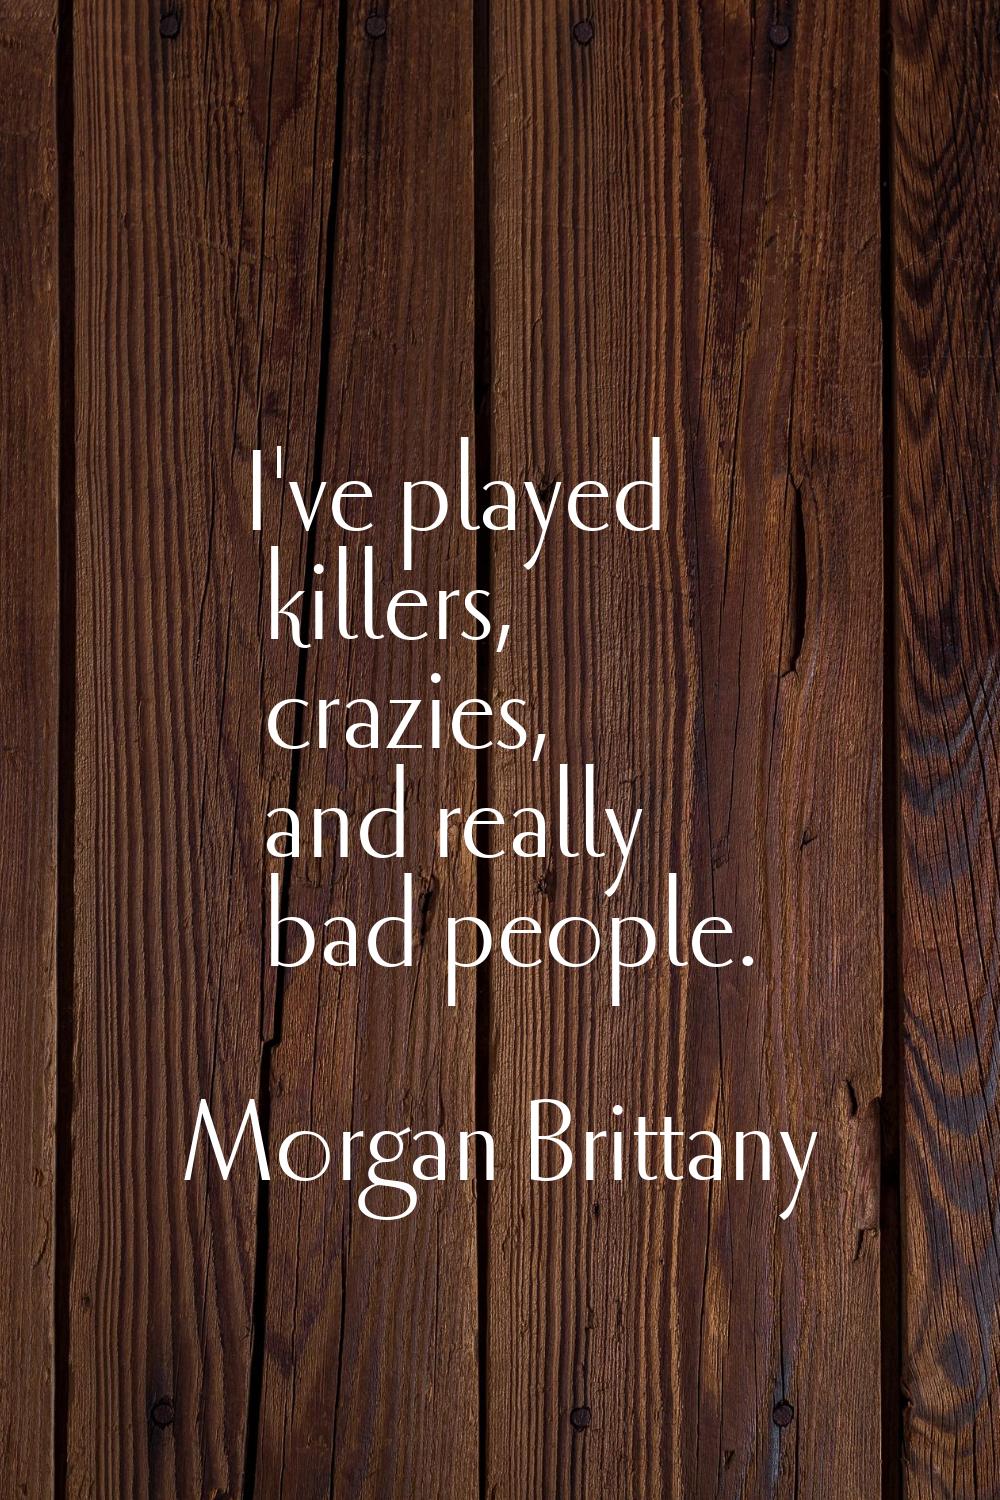 I've played killers, crazies, and really bad people.